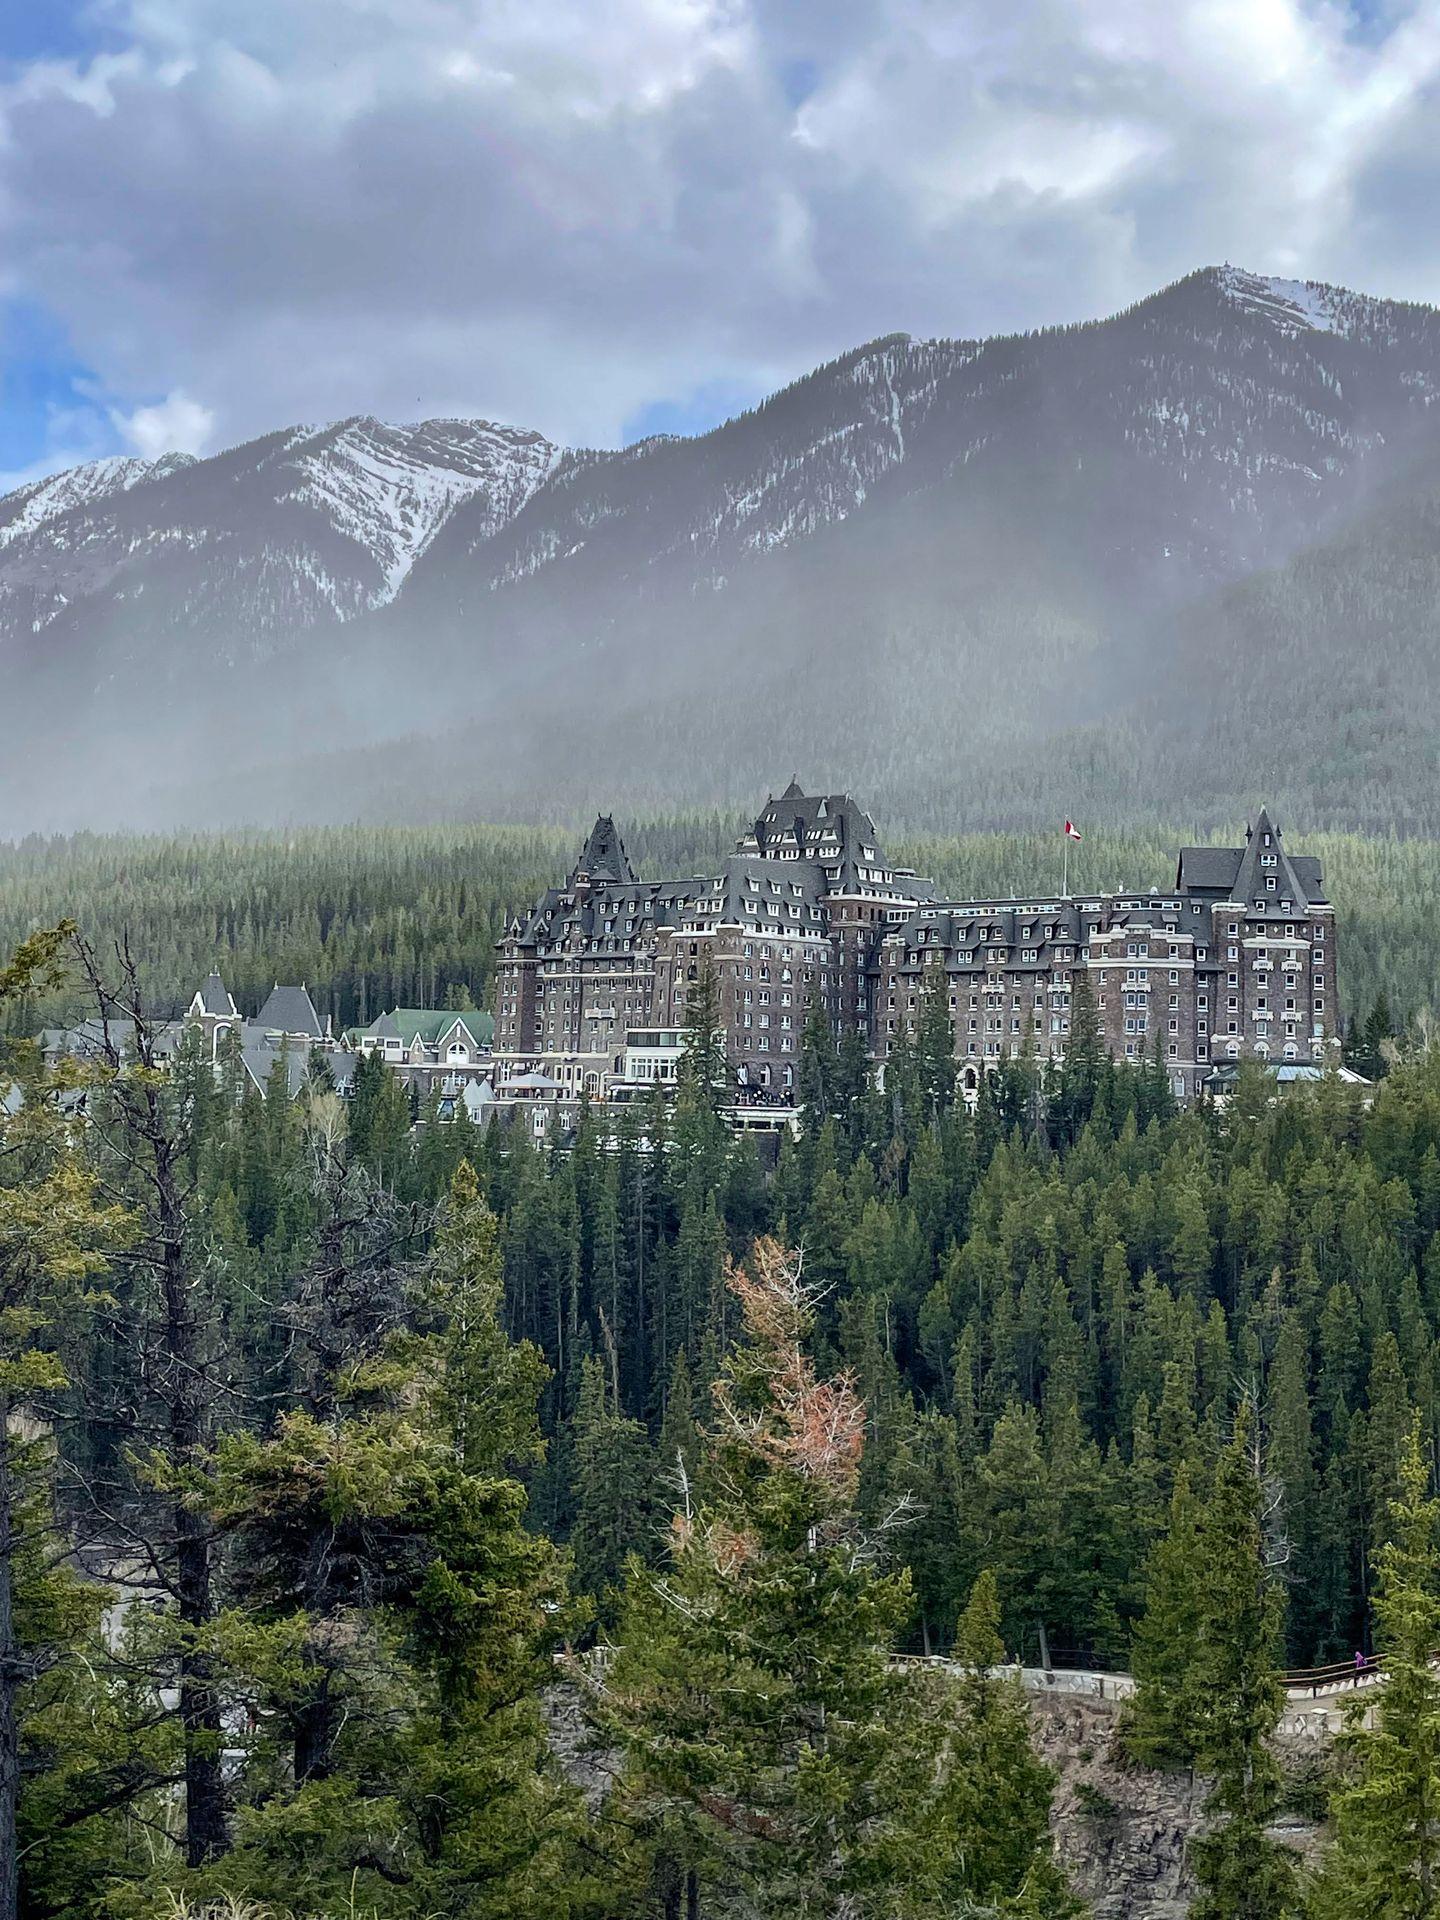 The view of the Fairmont Banff Springs from Surprise Corner in Banff.